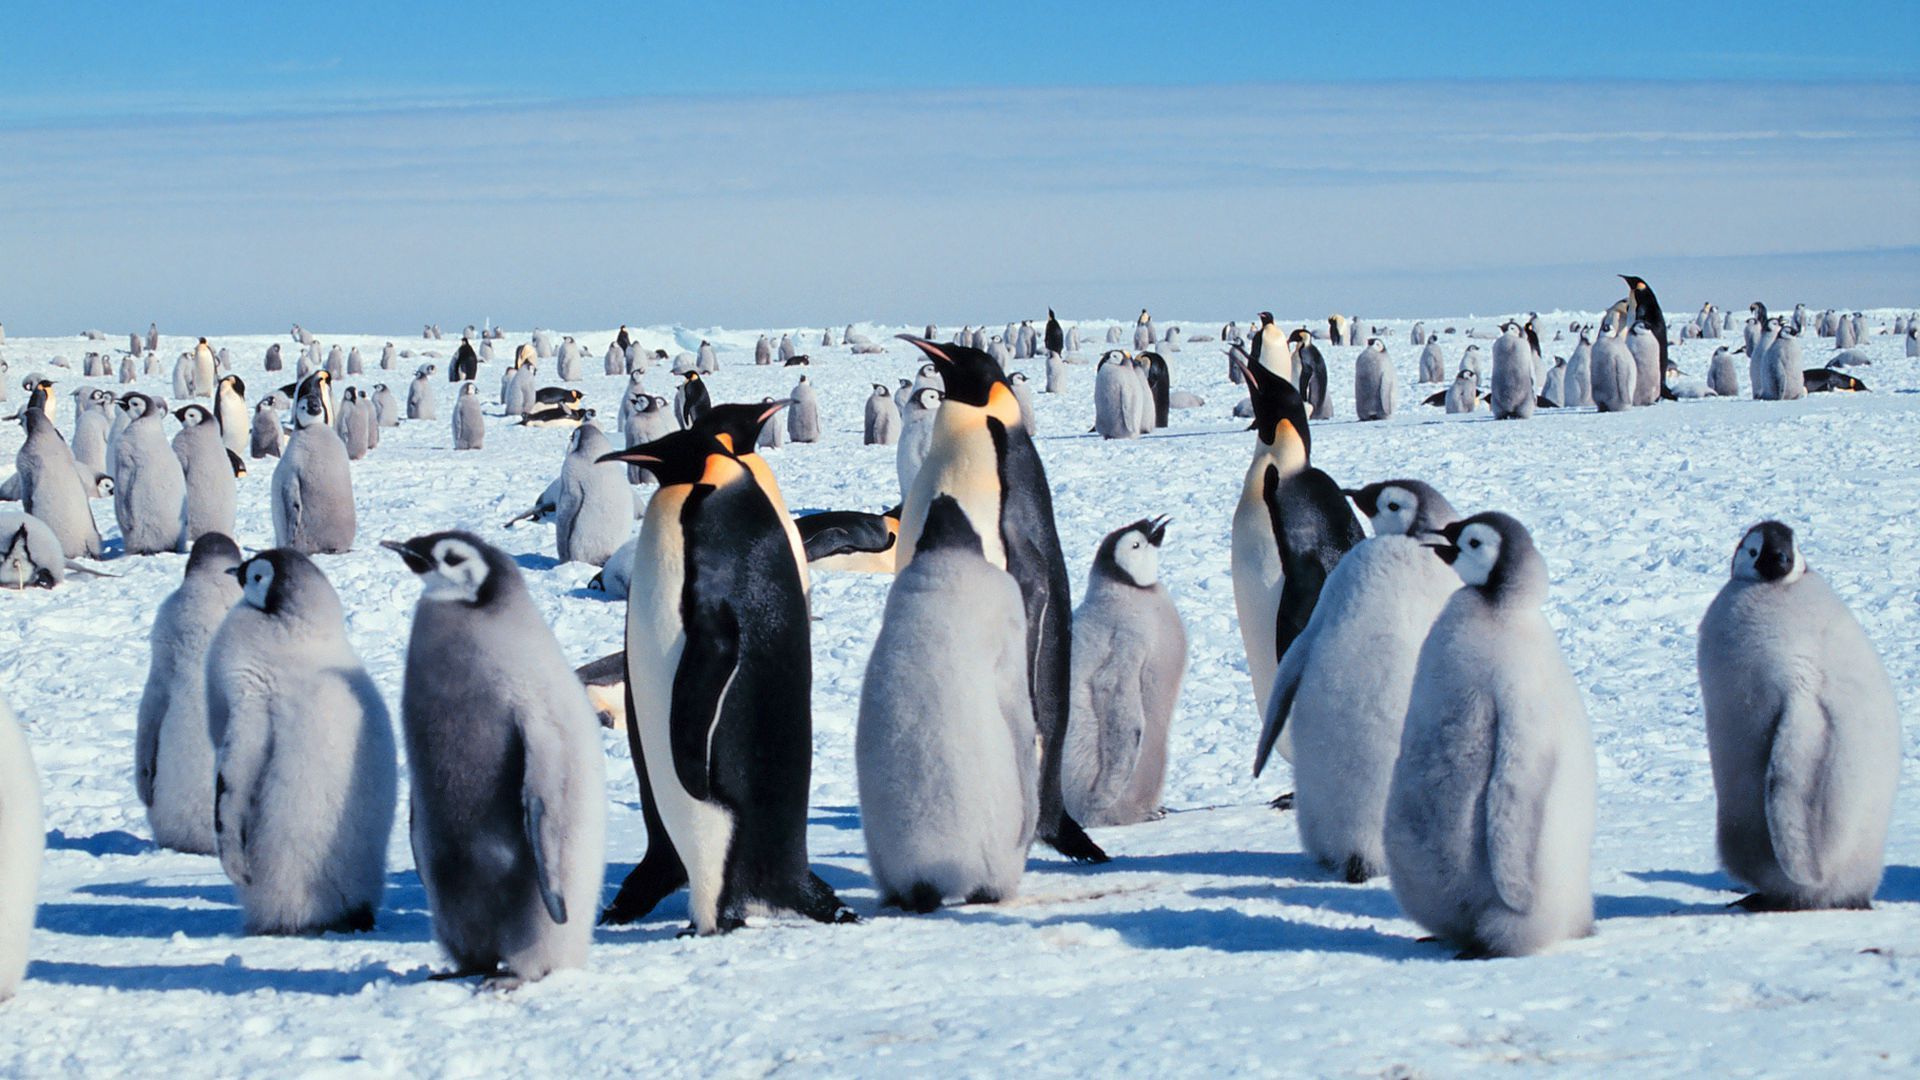 Emperor penguins with their young. Photo: HUM Images/Universal Images Group via Getty Images